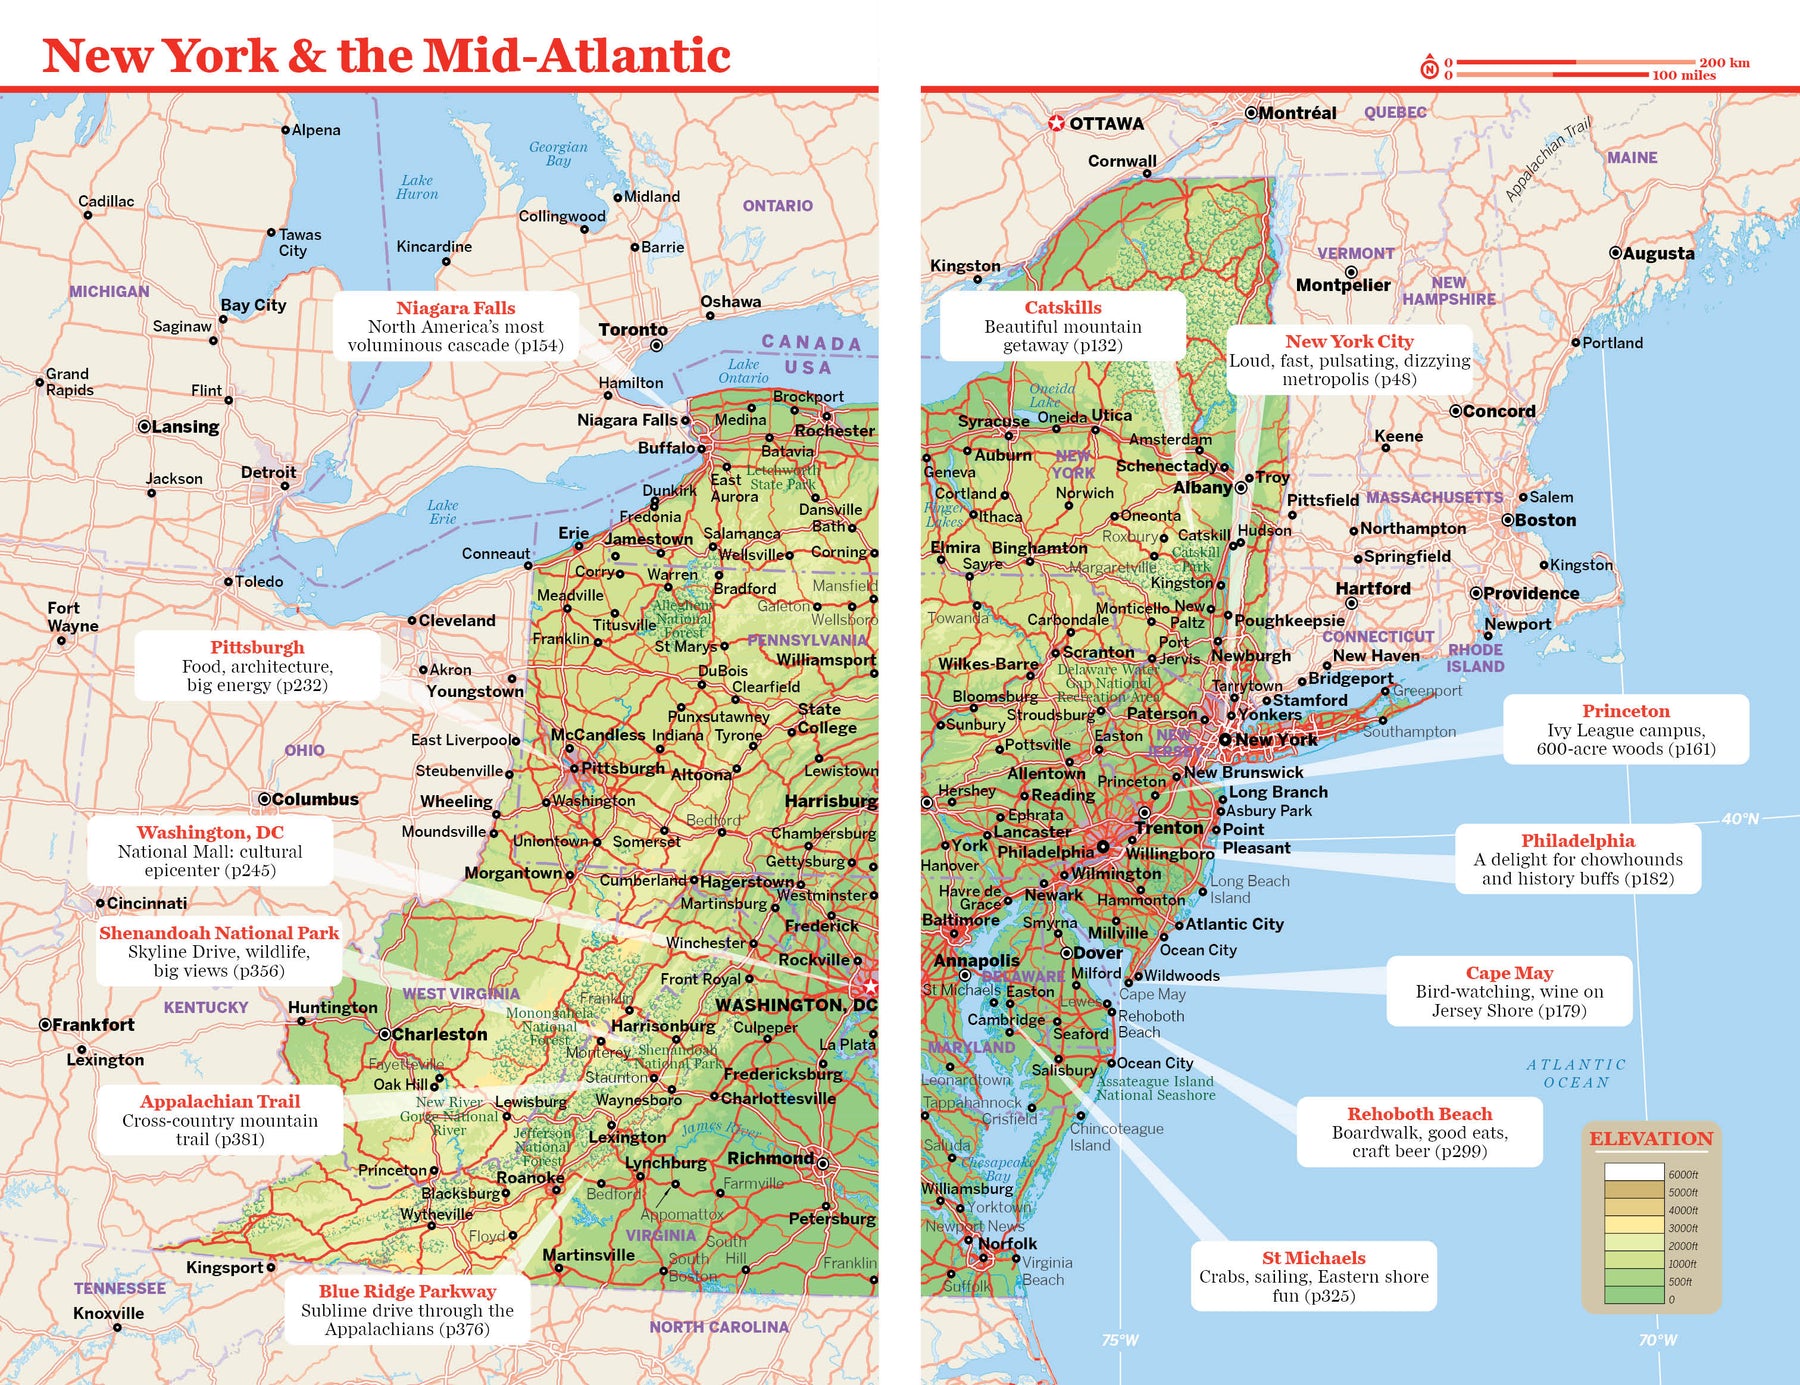 New York & the Mid-Atlantic preview